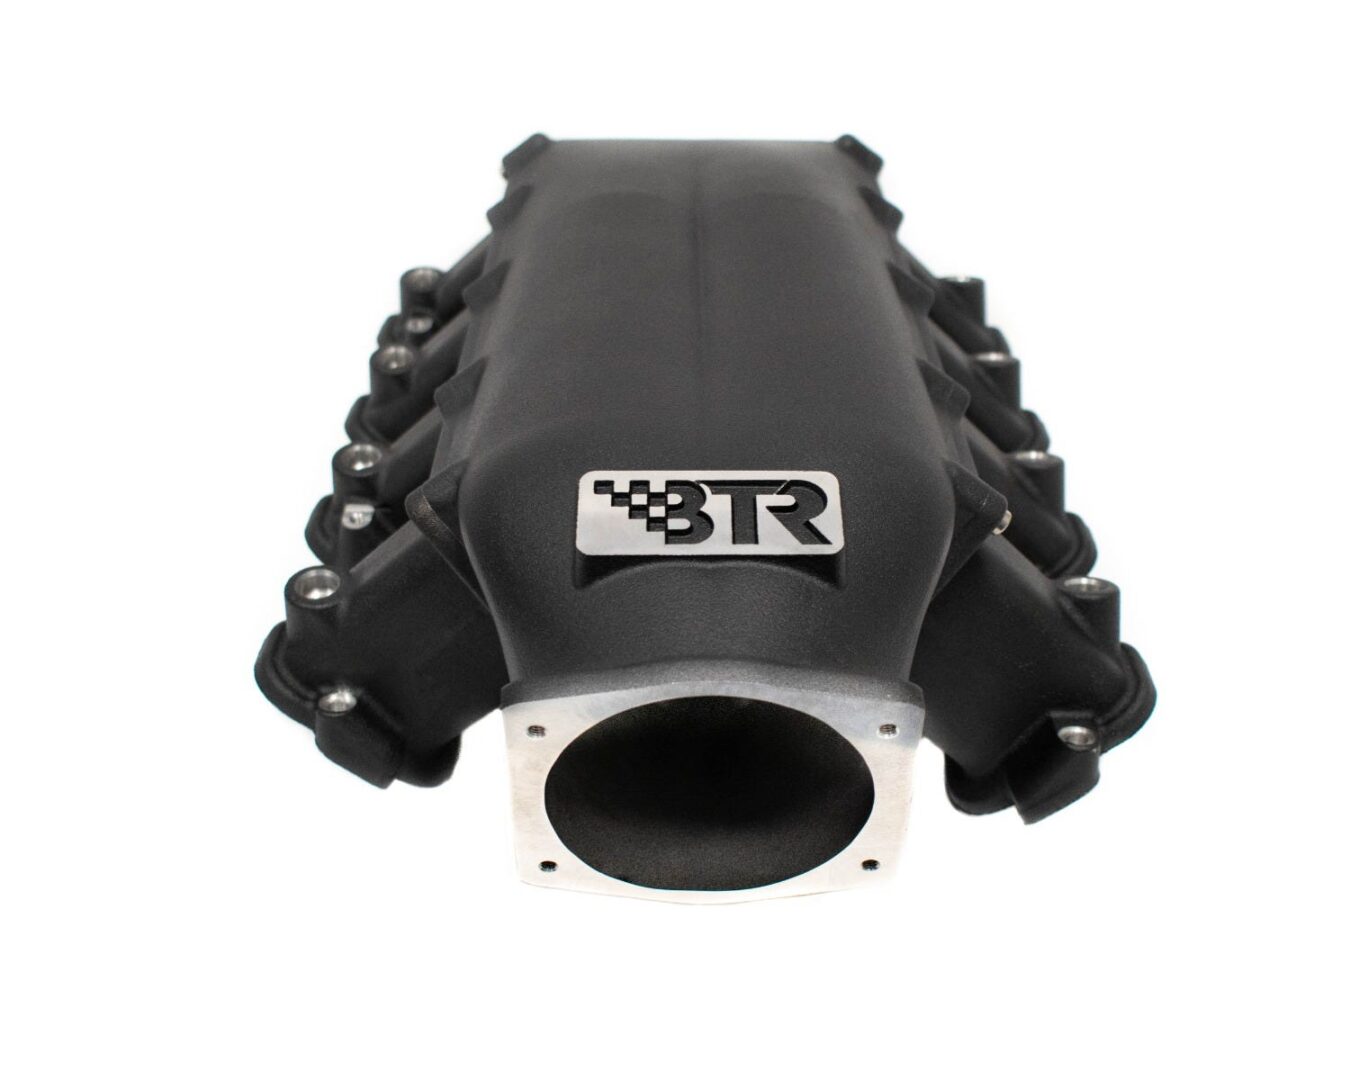 Matte black engine casing BTR with eight exhausts